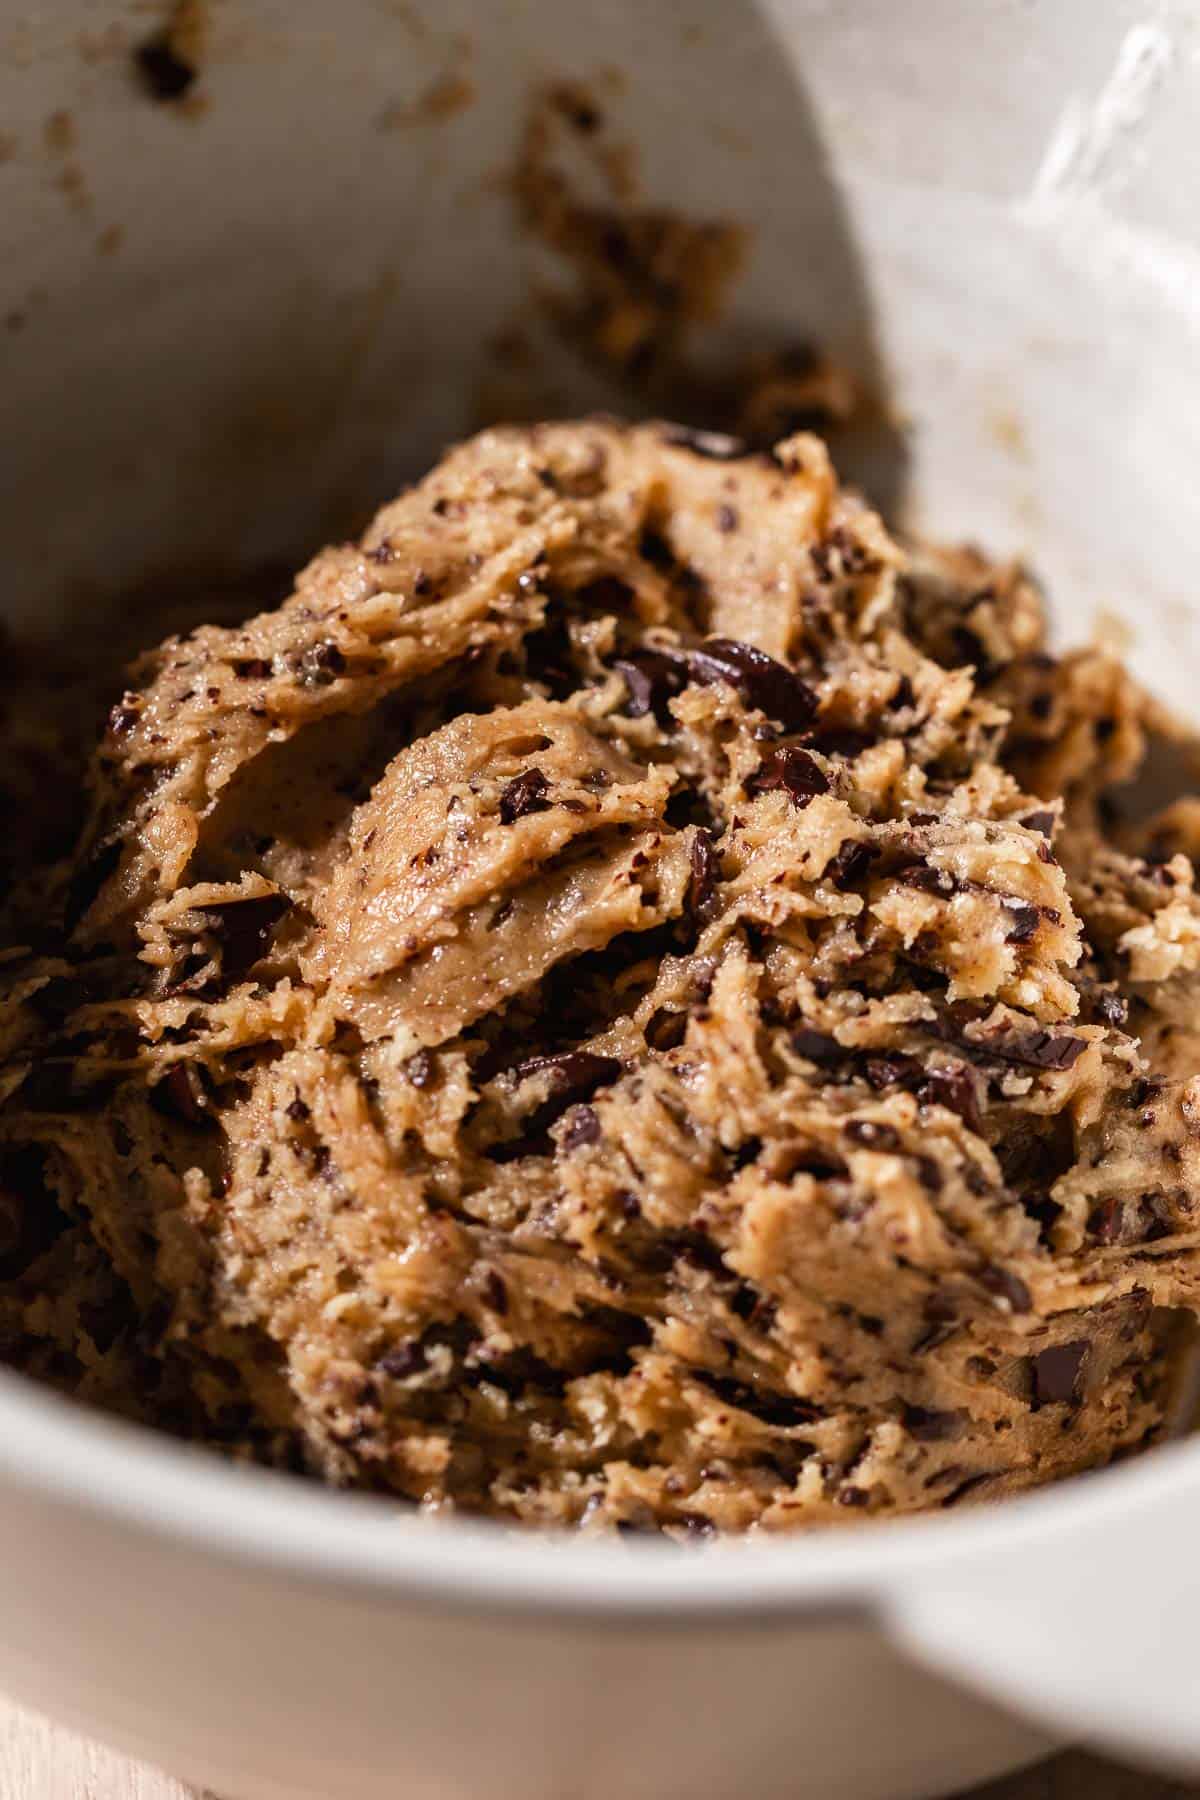 A mixing bowl with the chocolate chip cookie dough after mixing in the dry ingredients.